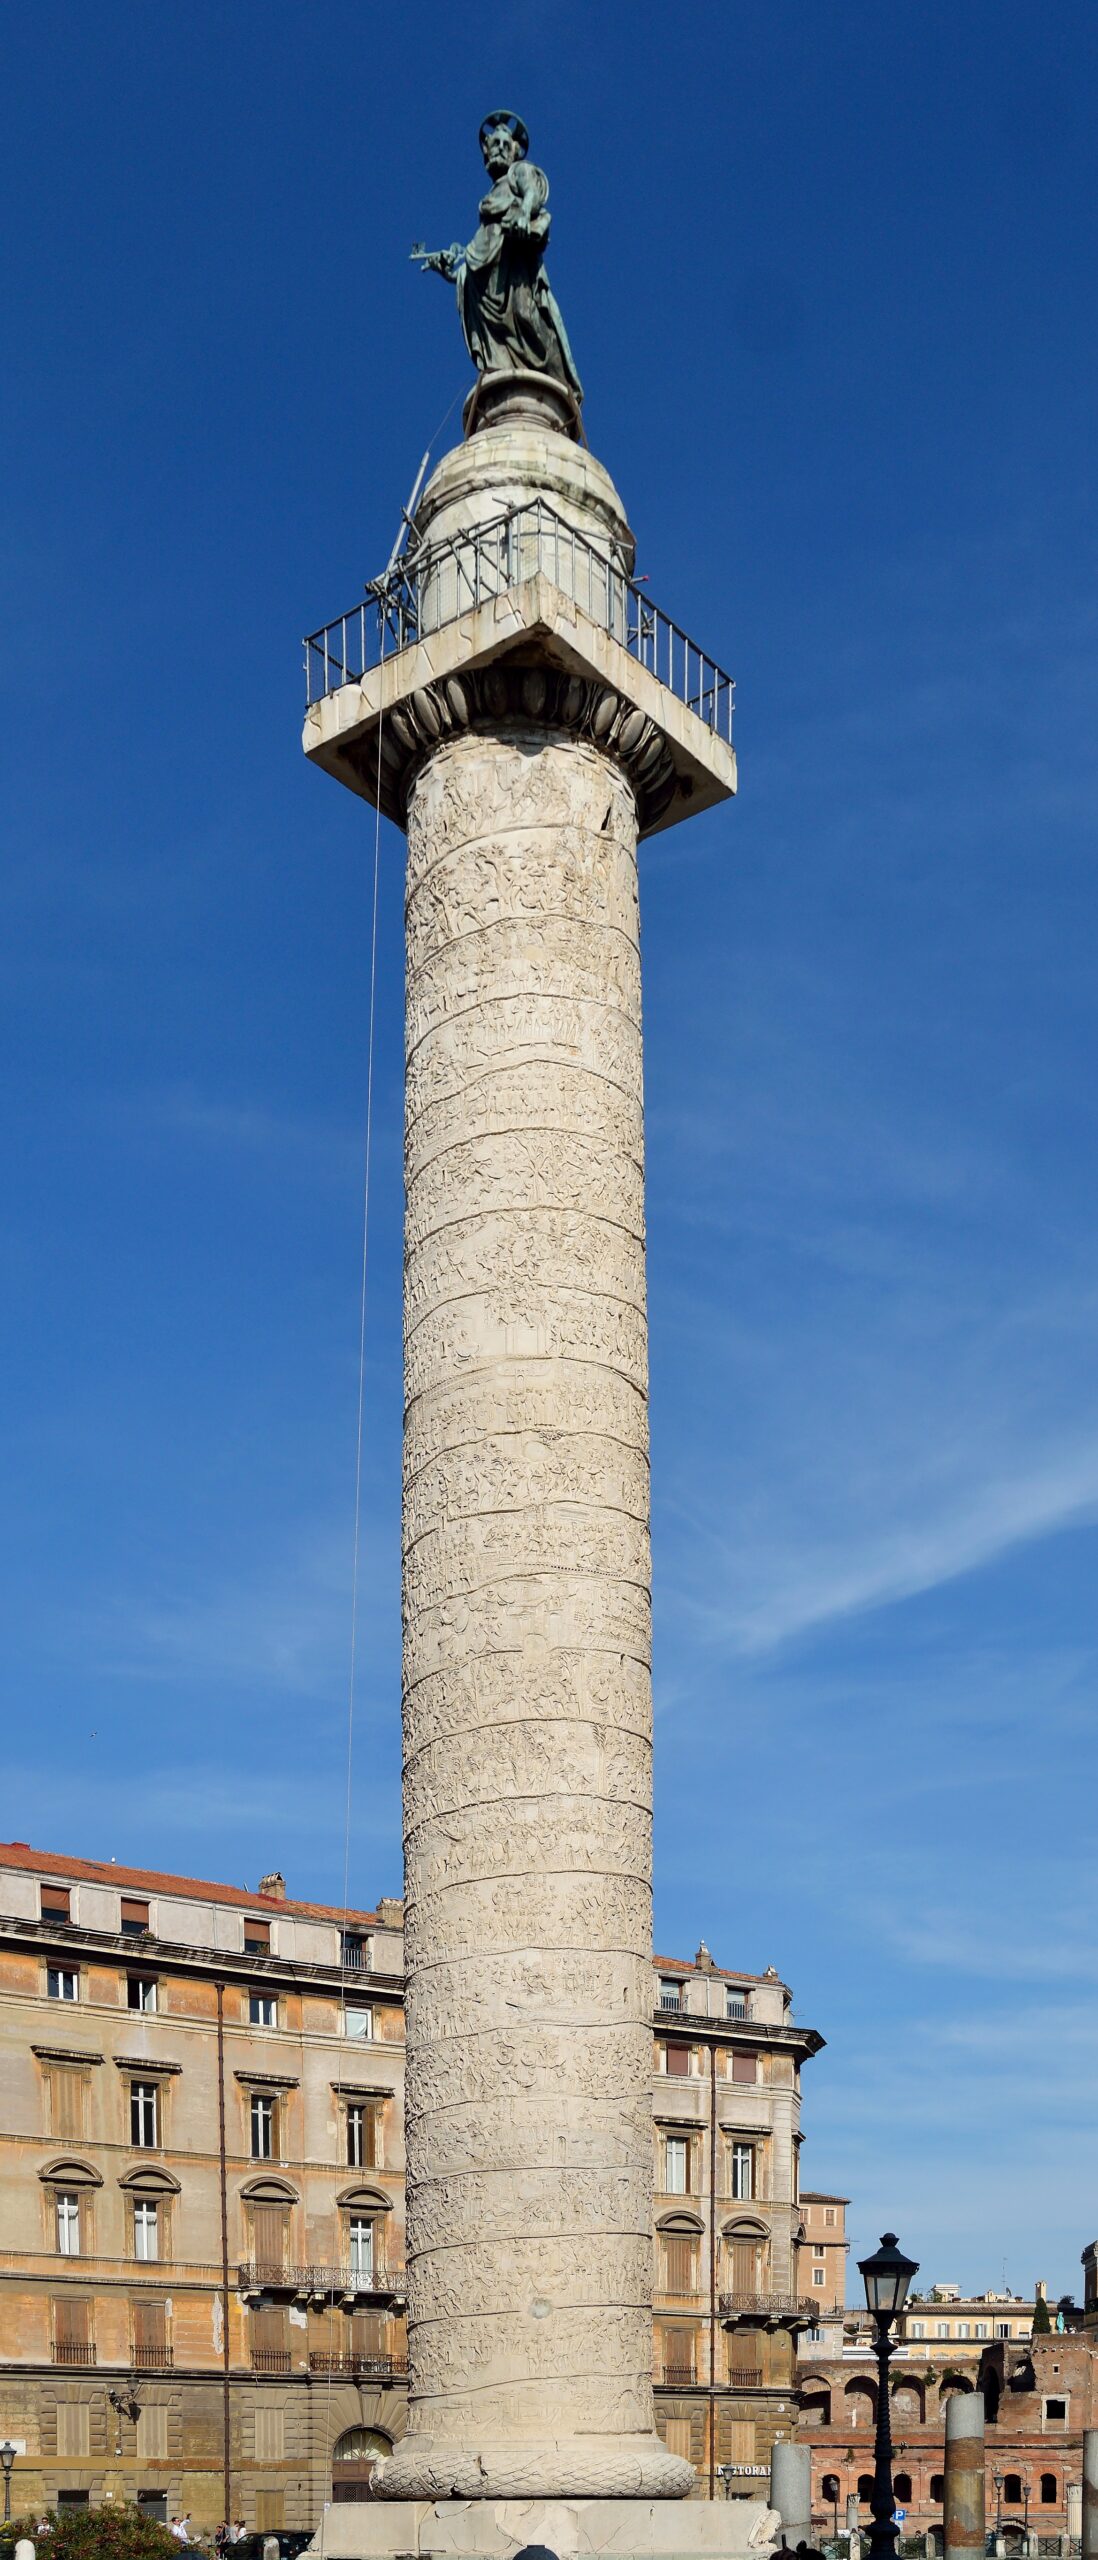 A view of Trajan's Column today